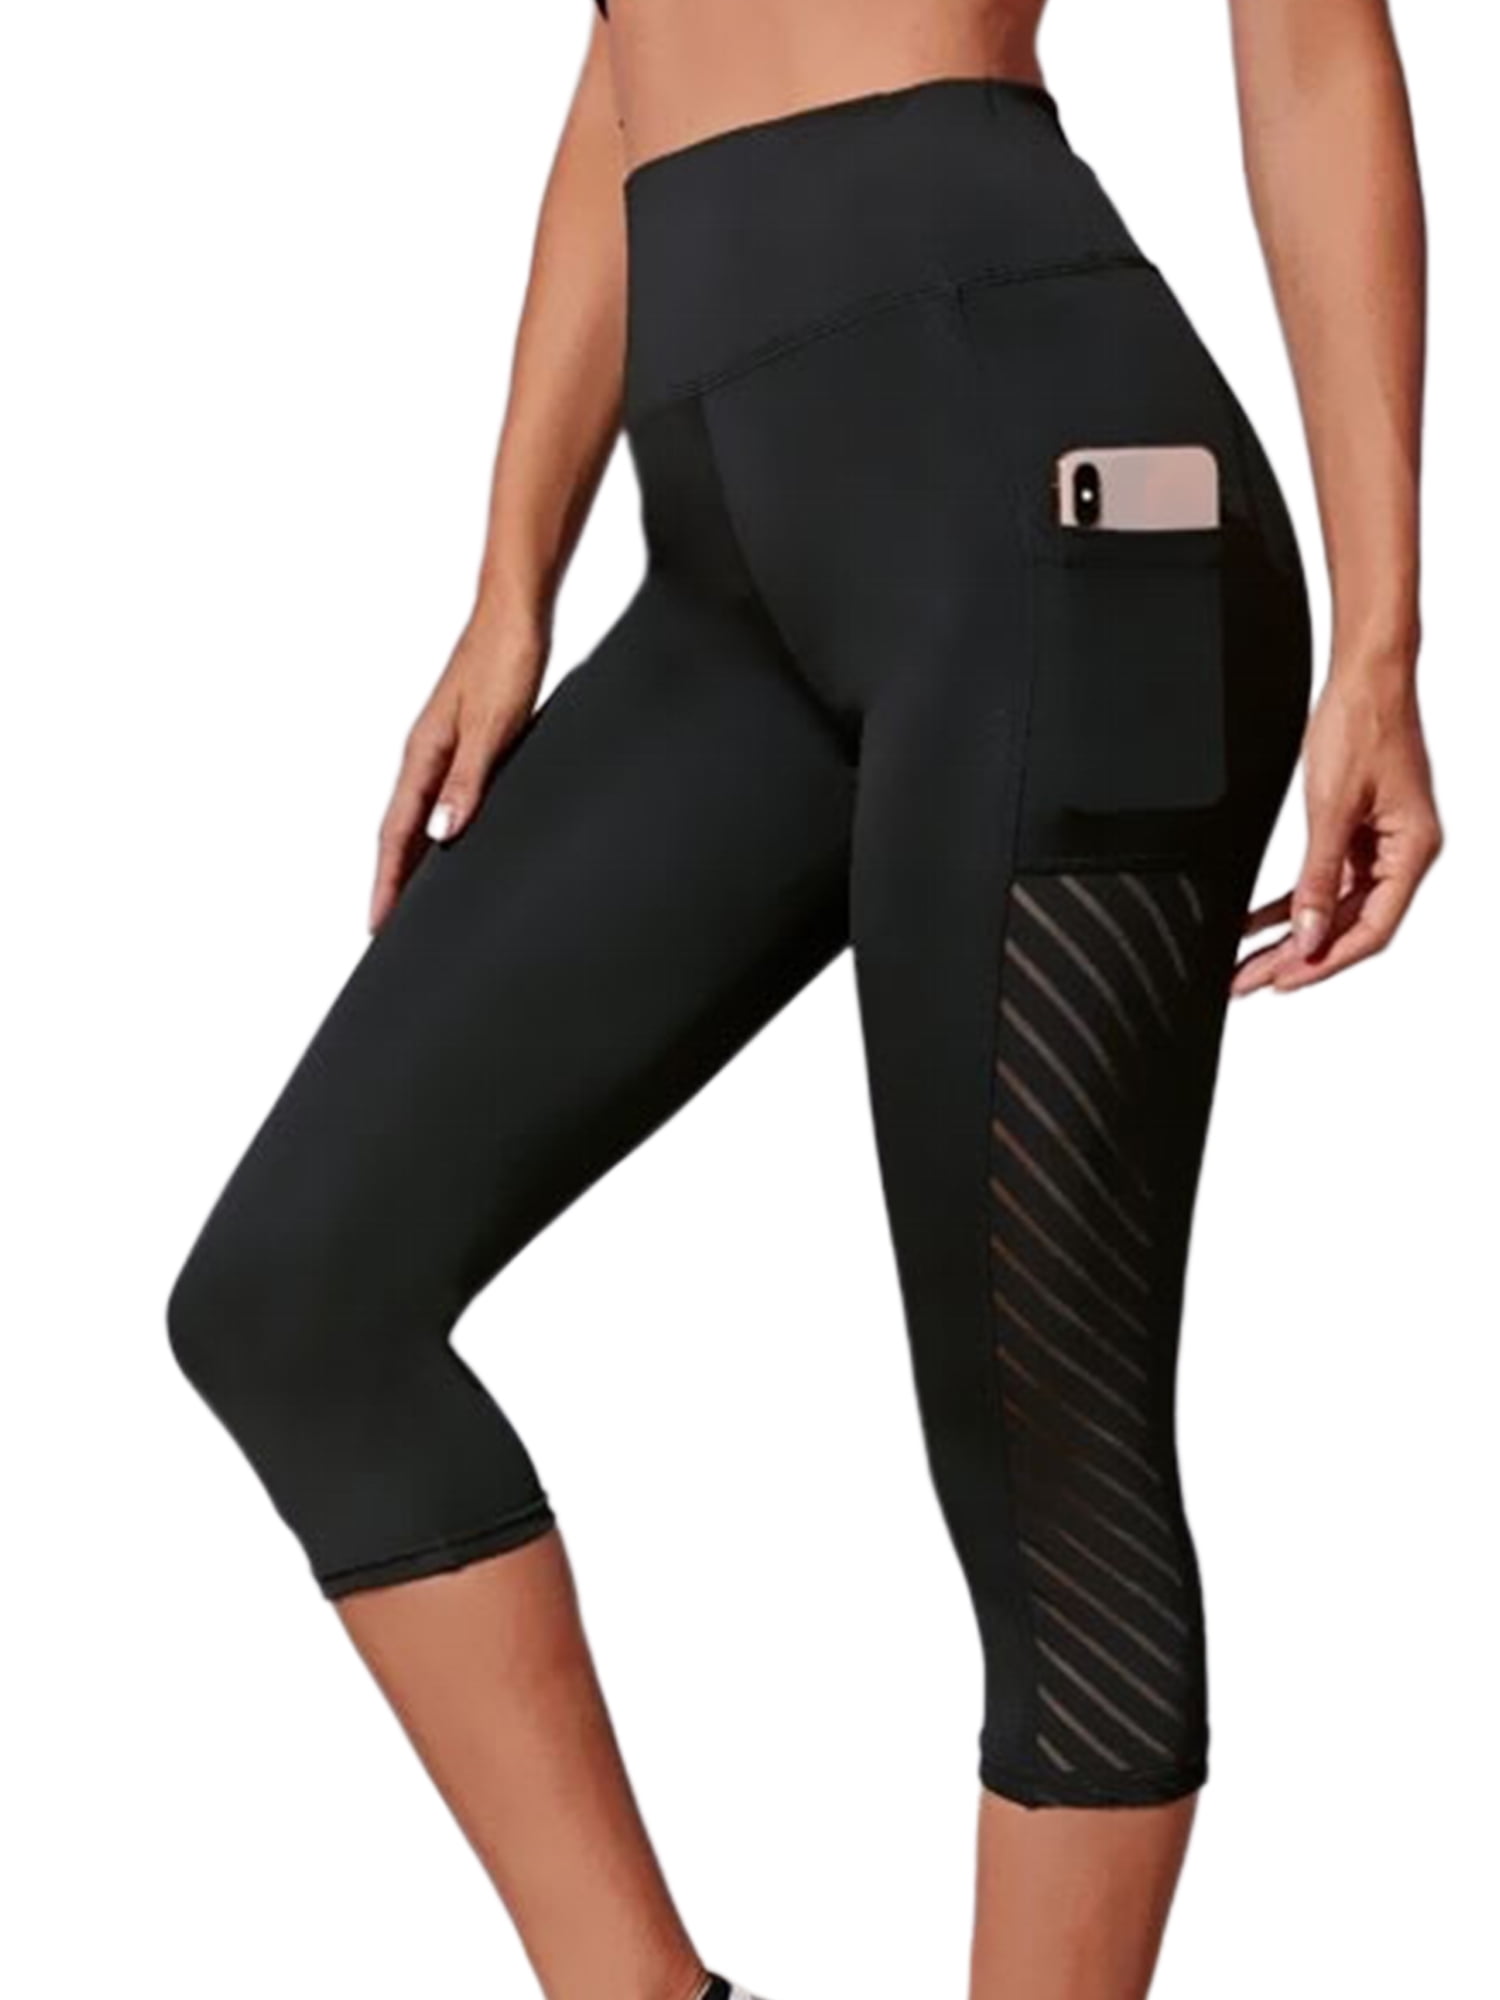 Capri Leggings With Pockets for Women Printed Fitness Compression Pants  Black XL